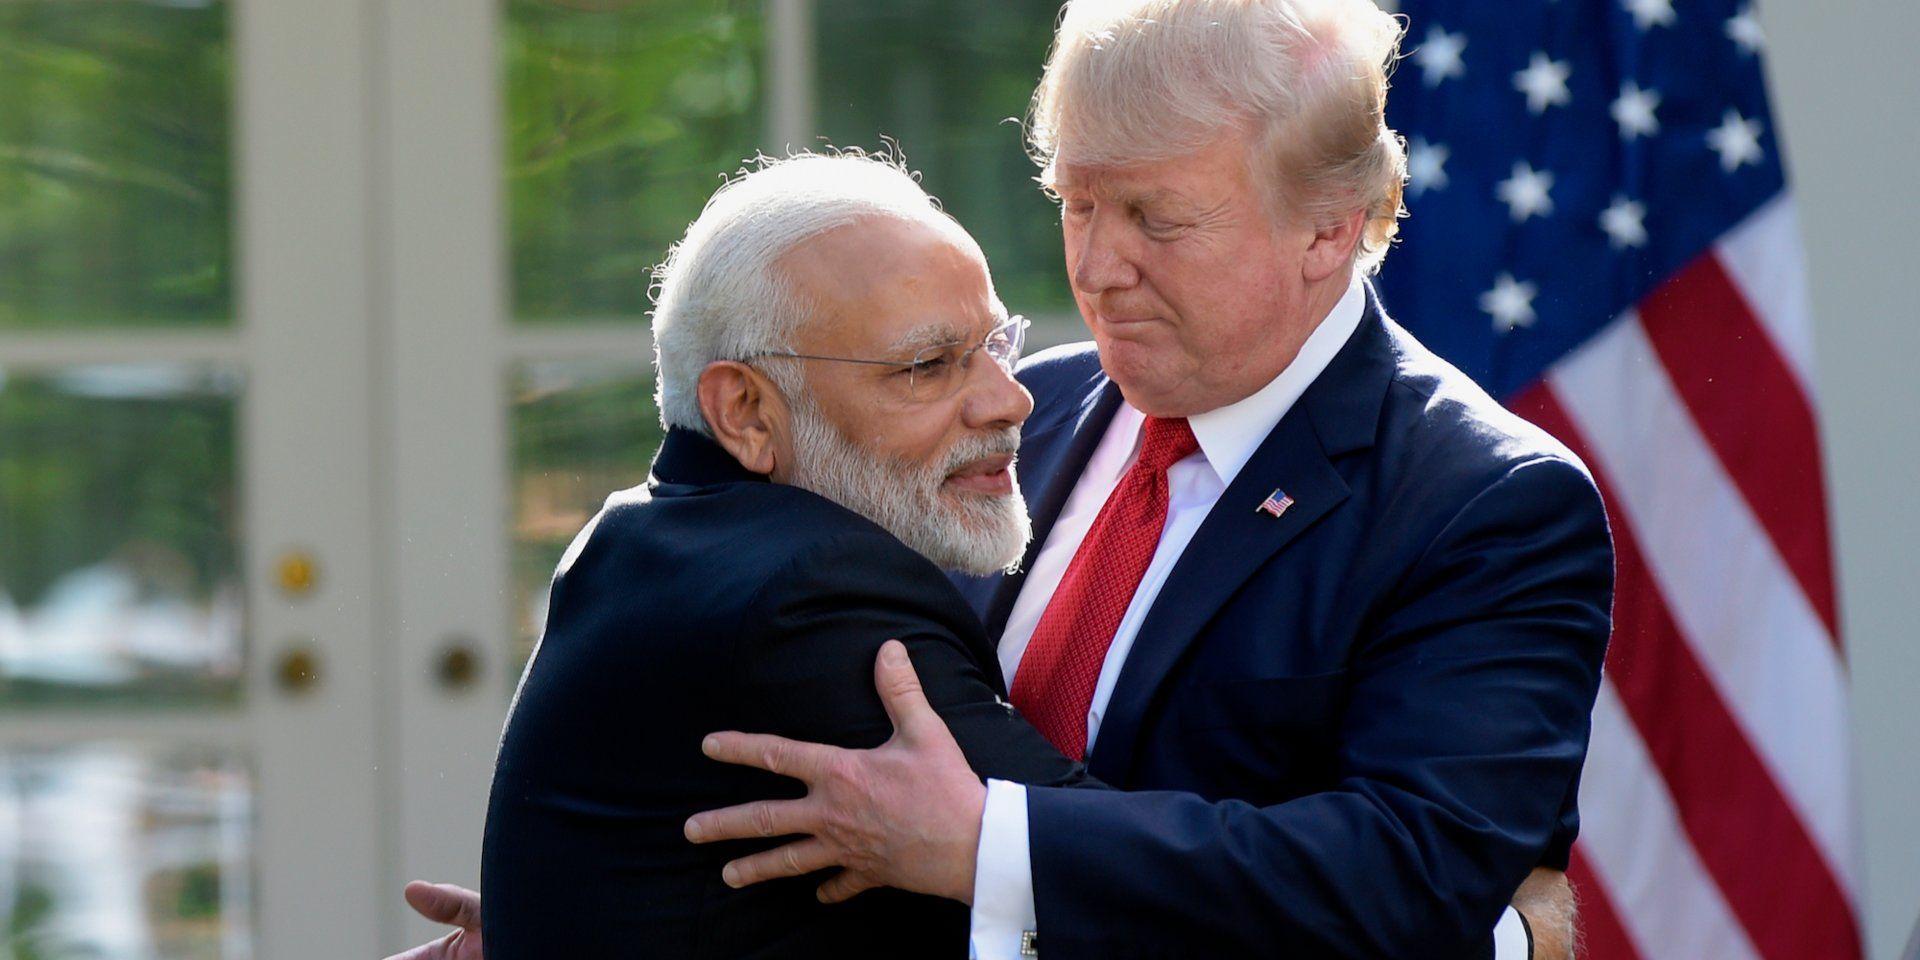 The US’ actions against India were not a surprise but a shock from its strategic partner – Indian expert